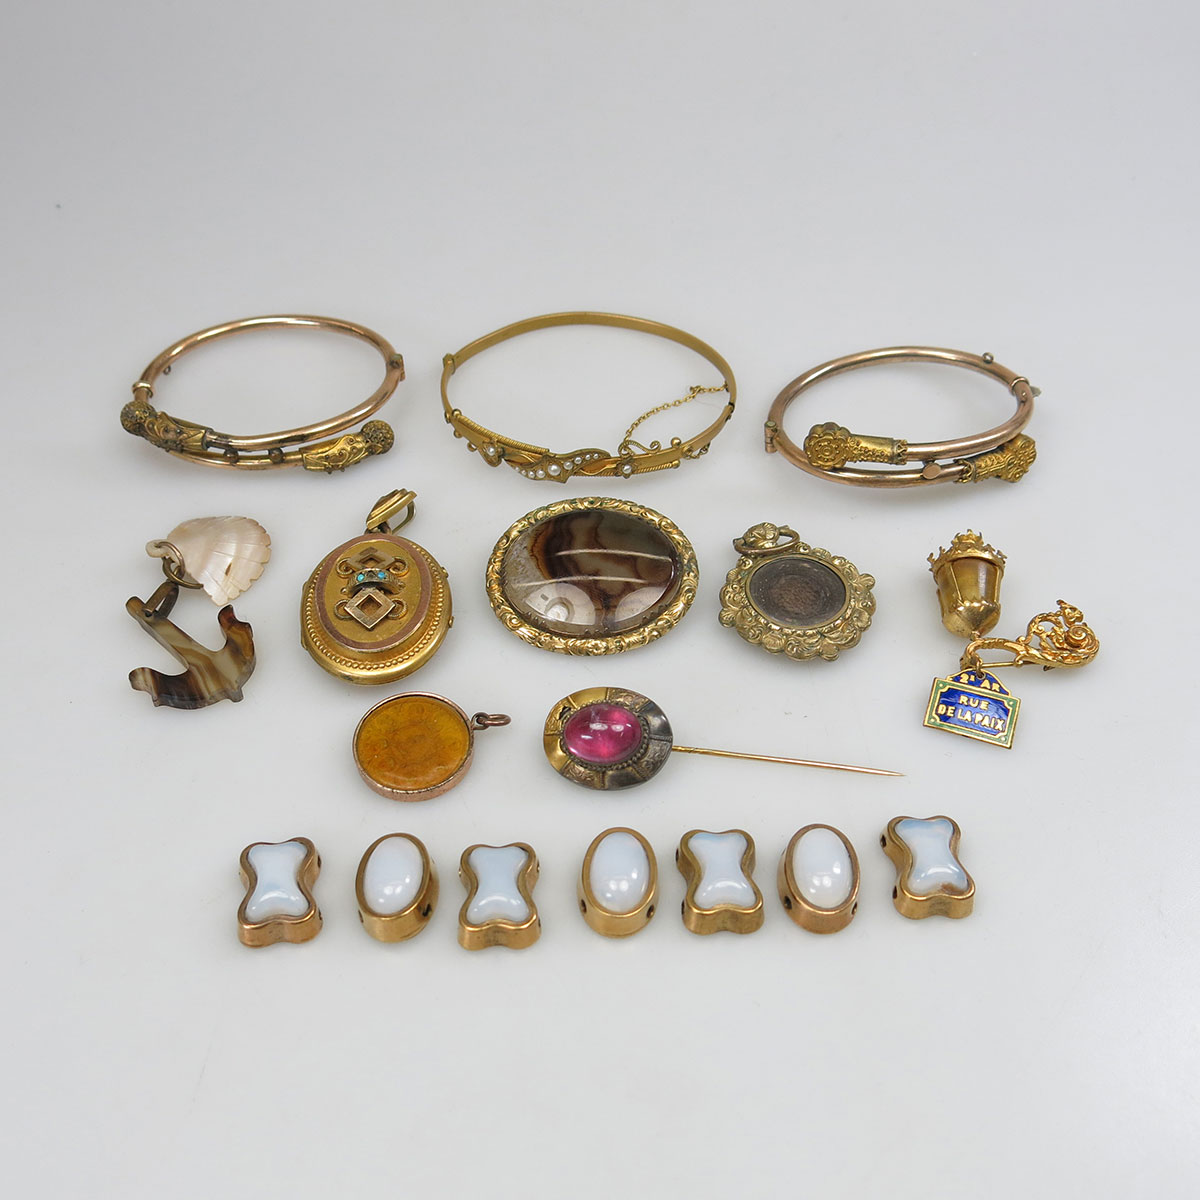 Small Quantity Of Gold-Filled Jewellery